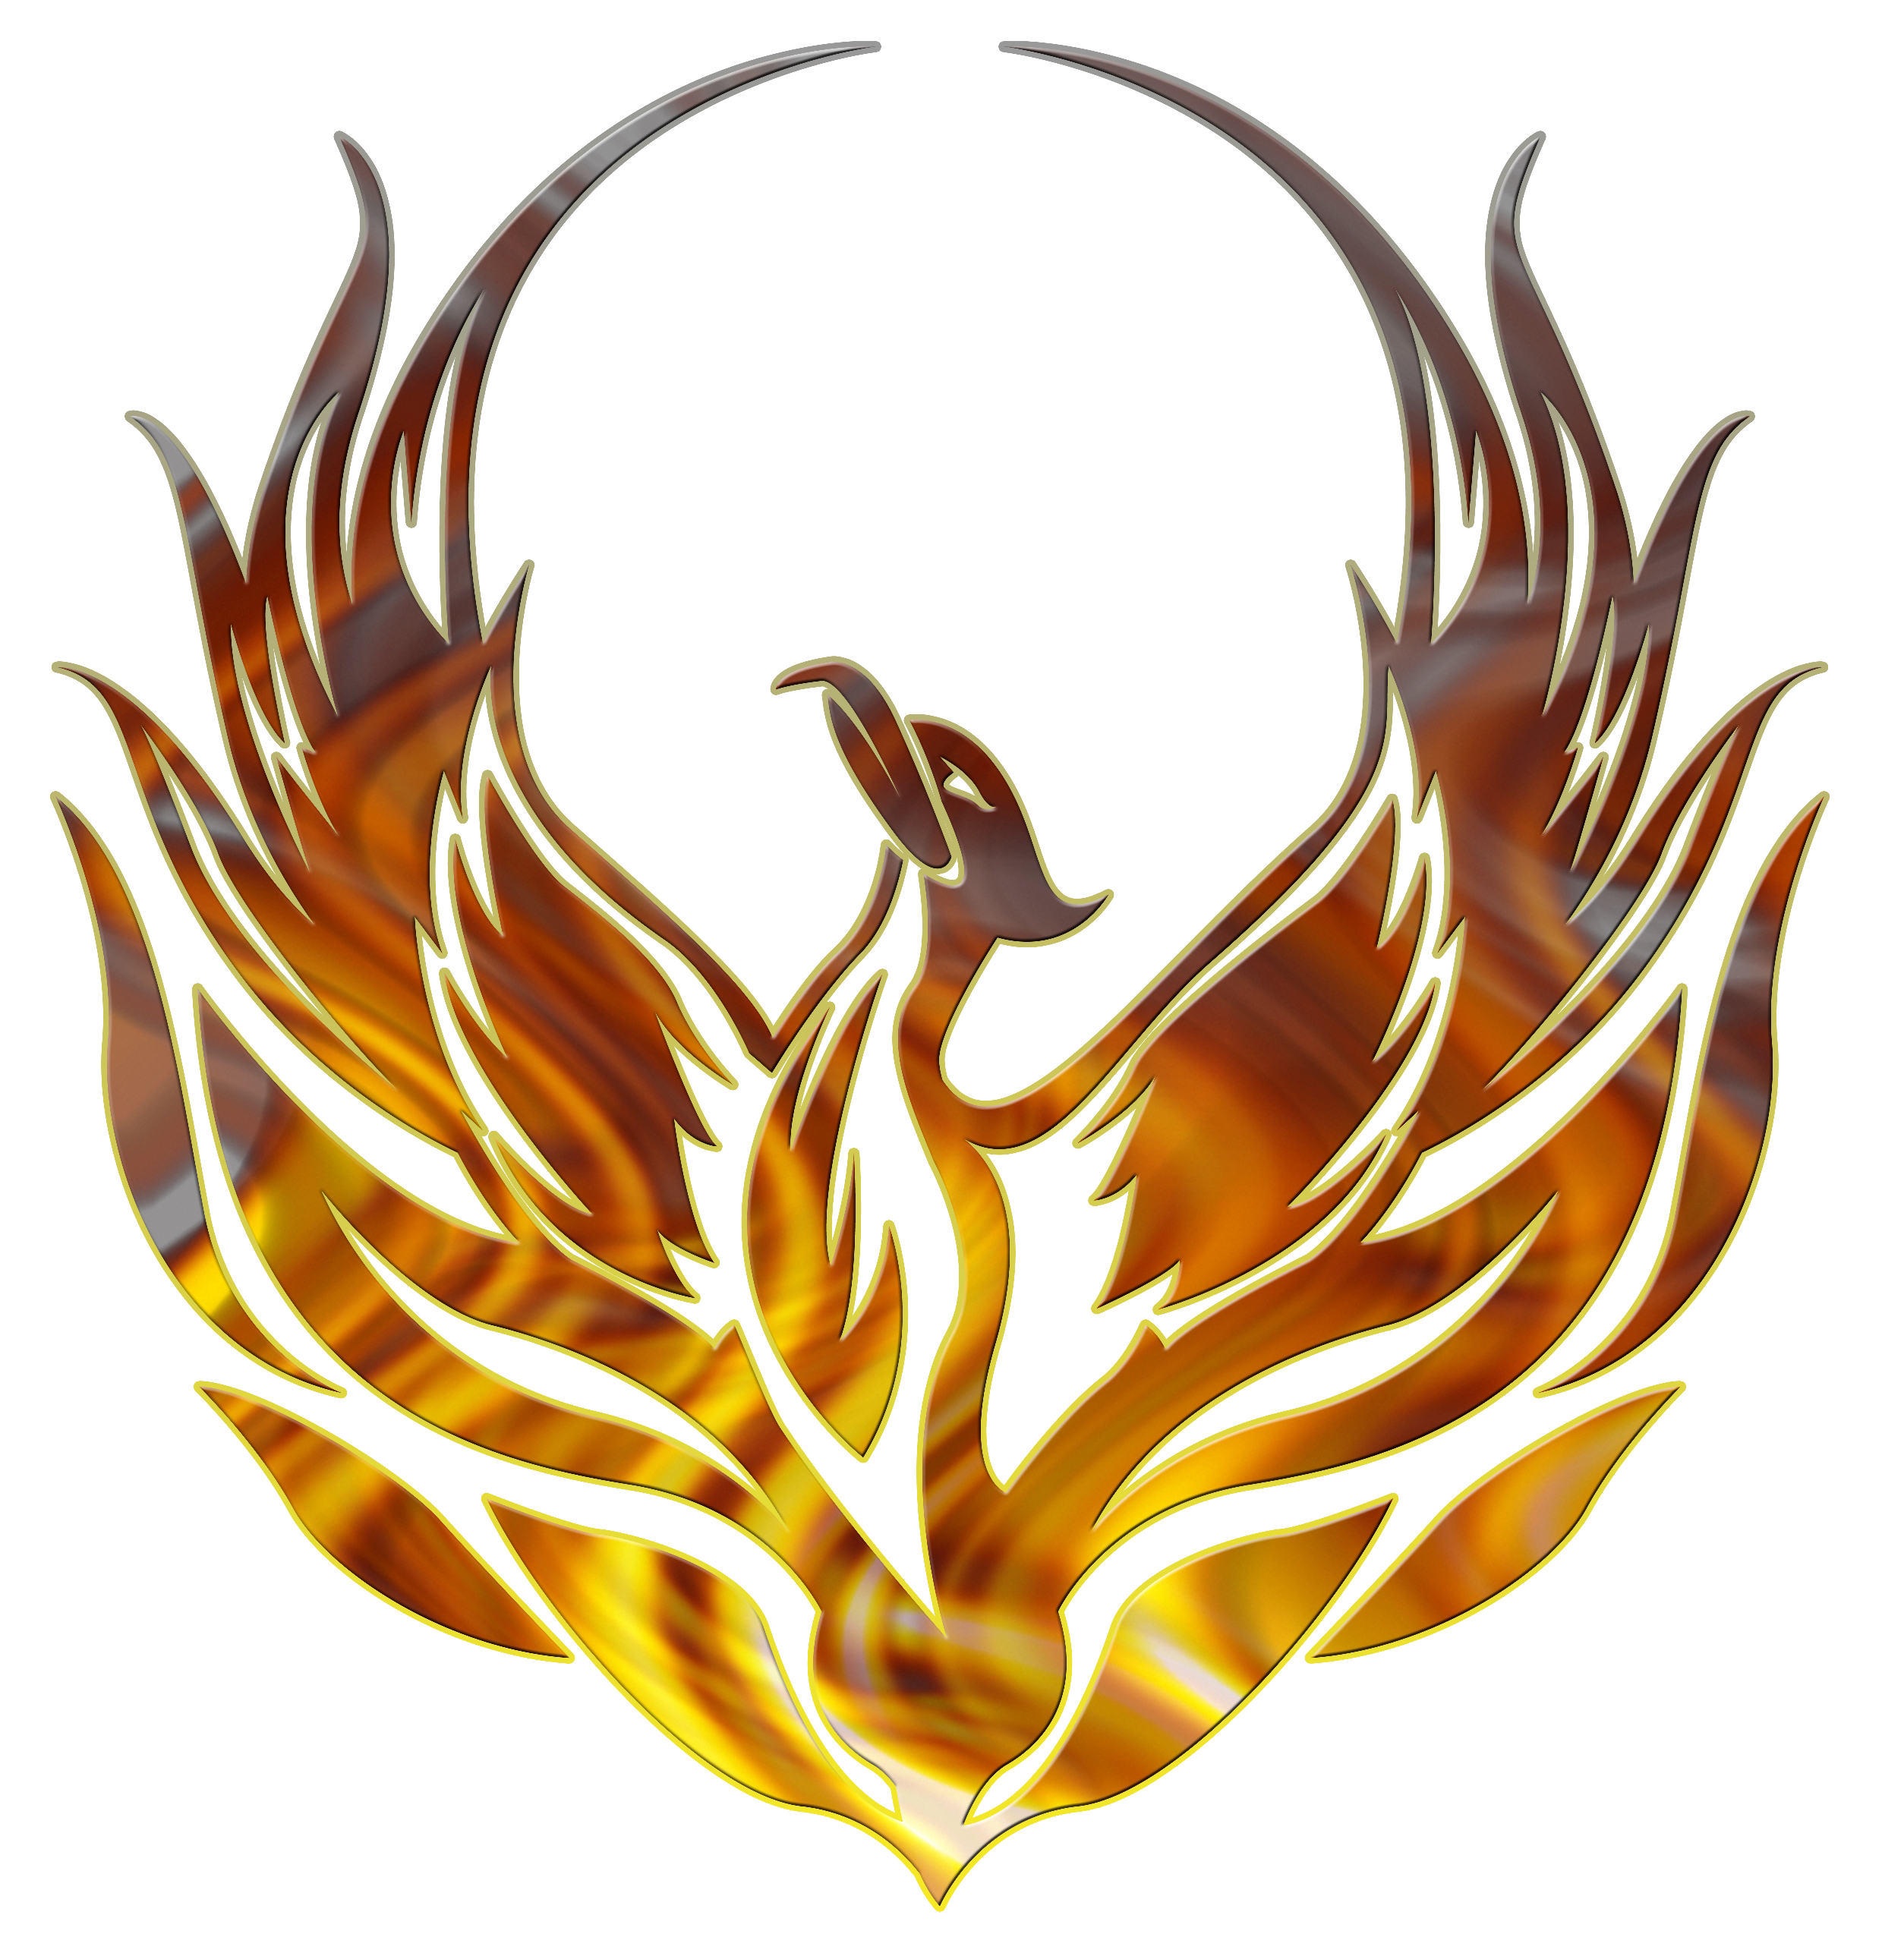 Decal Legendary Phoenix Creature PNG Image High Quality Clipart